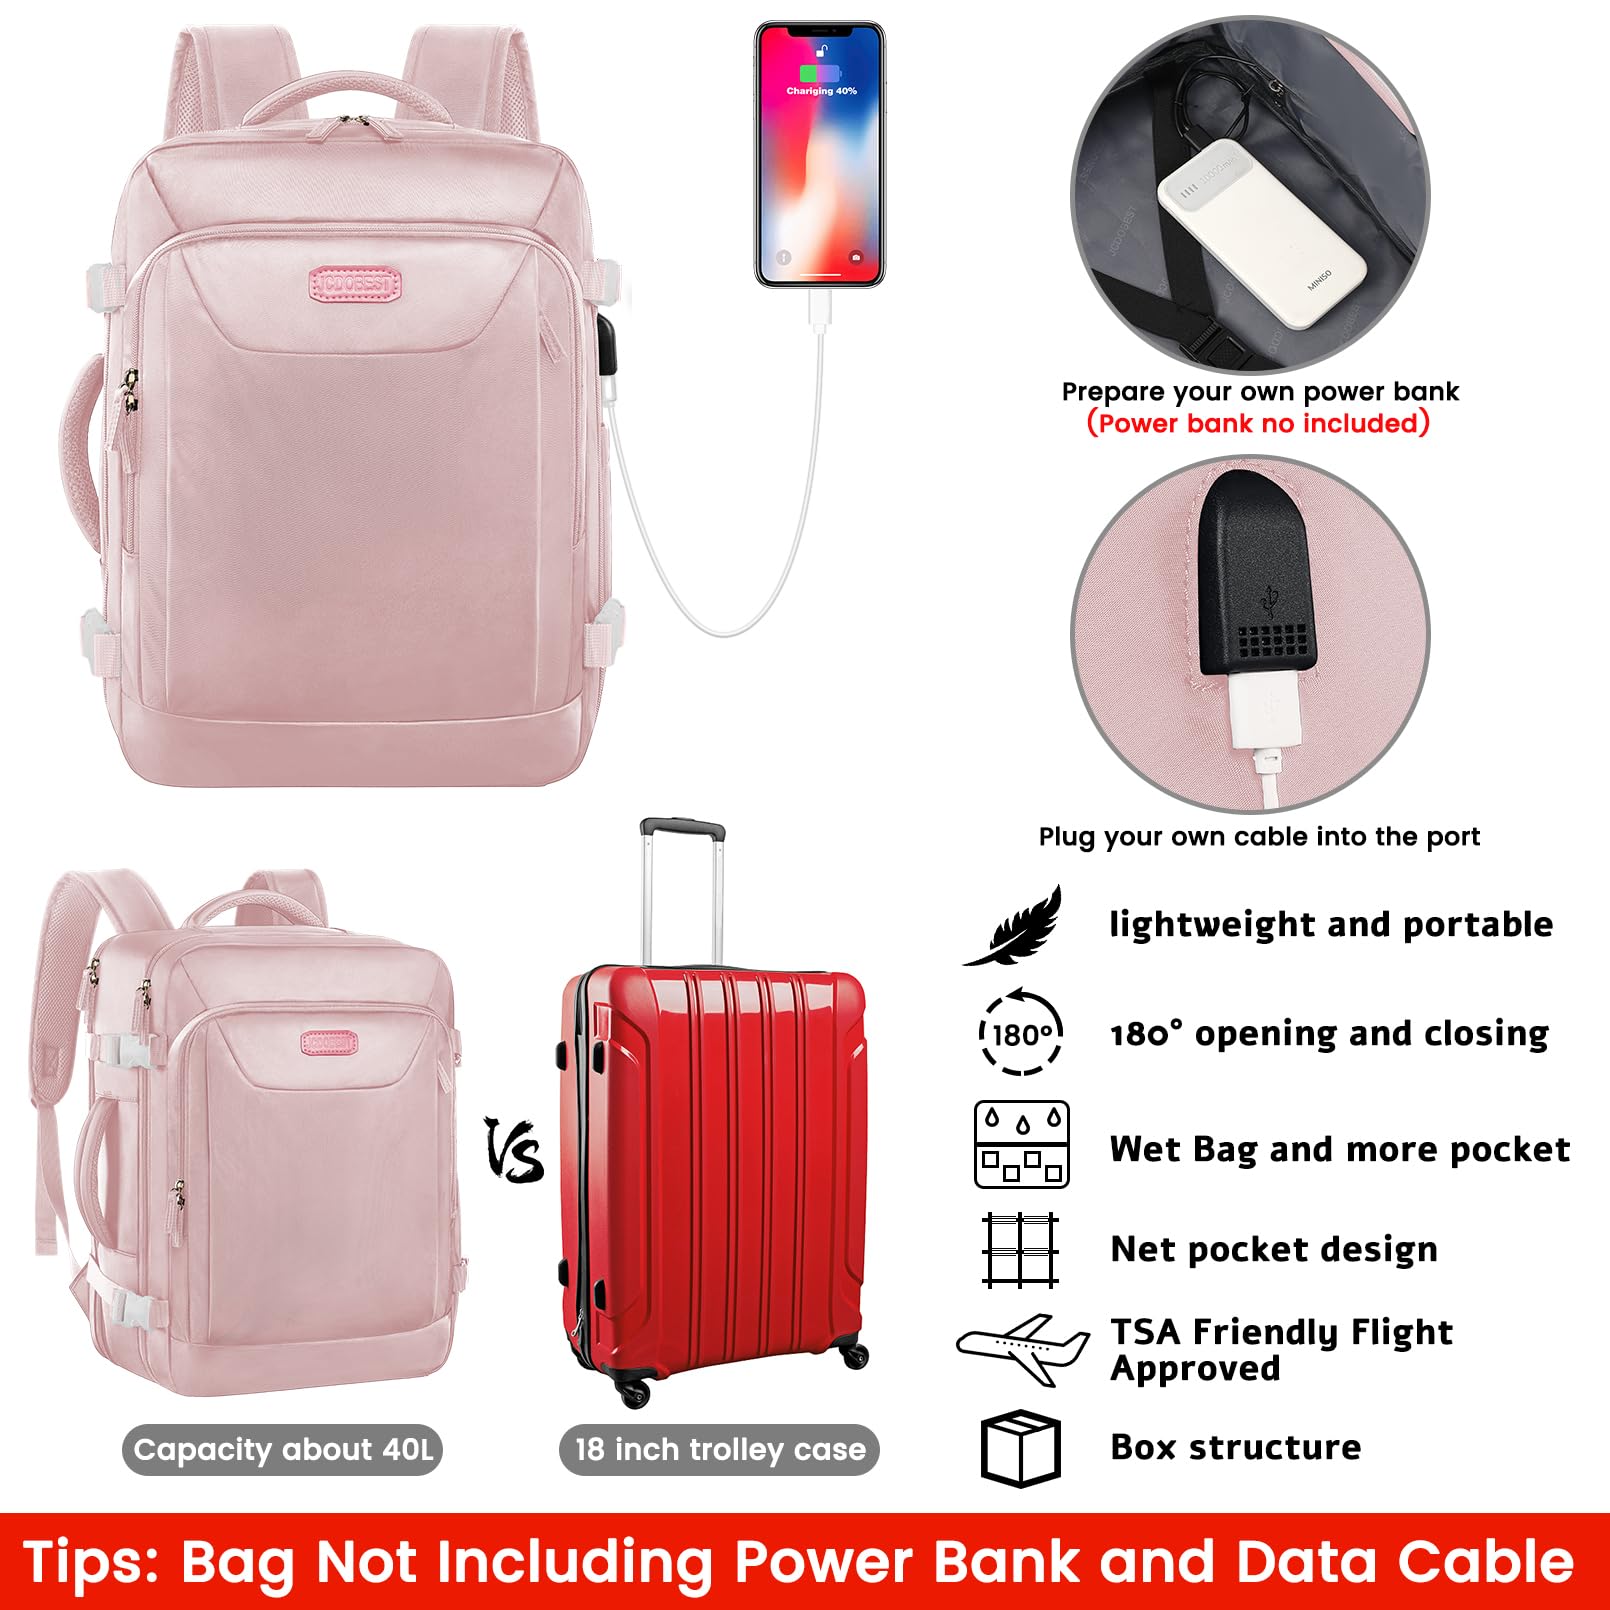 JCDOBEST Travel Backpack for Women, Carry On Backpack with USB Charging Port, TSA 17inch Laptop Backpack Flight Approved, College Nurse Bag Casual Daypack for Weekender Business Hiking, Pink